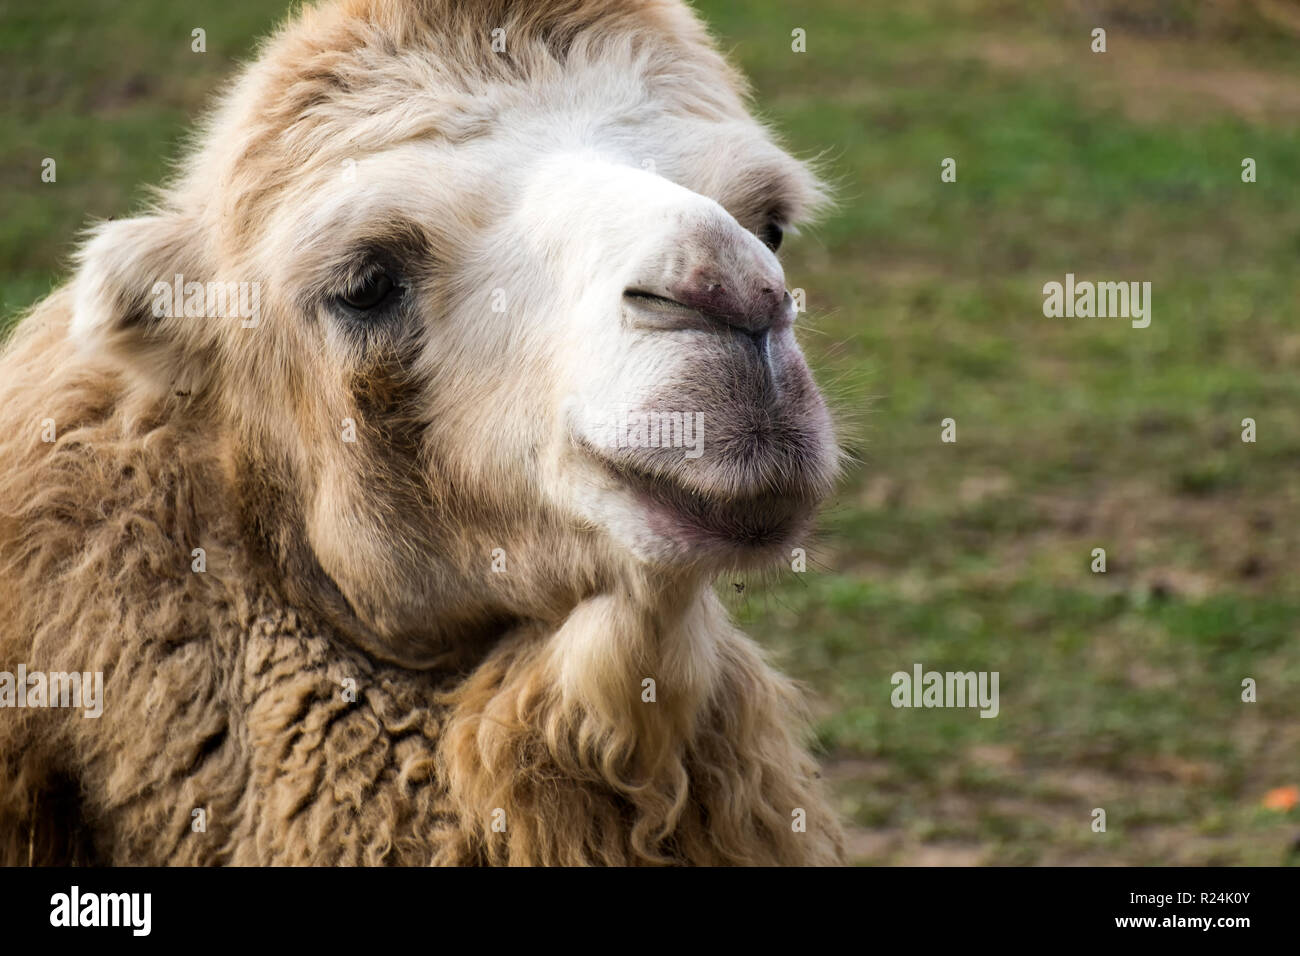 Head of white Bactrian camel close up (Camelus bactrianus) Stock Photo